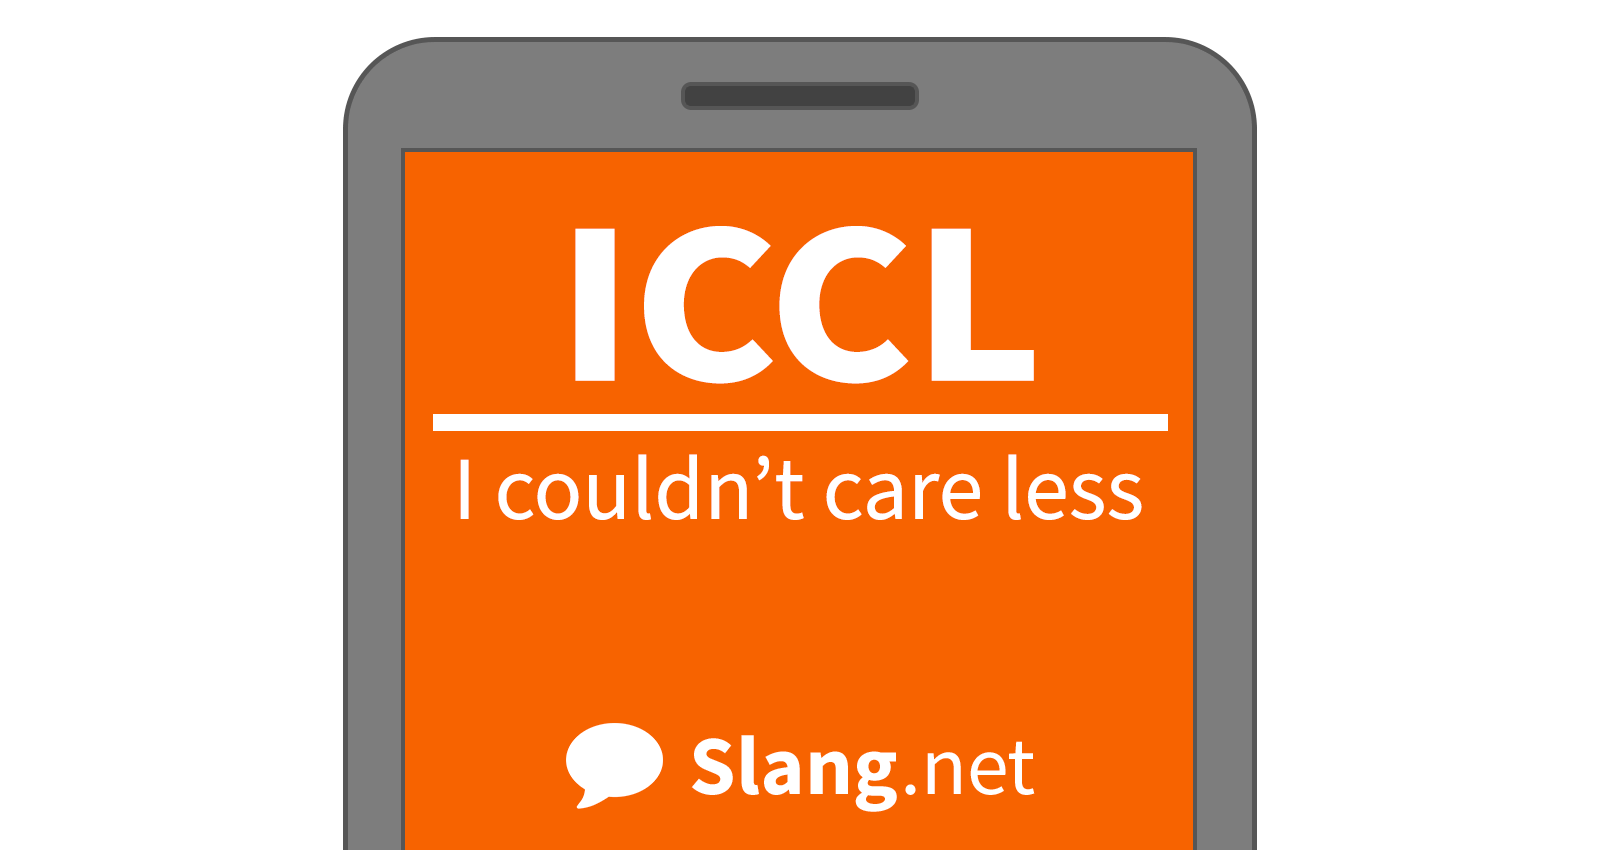 ICCL stands for &quot;I couldn't care less&quot;